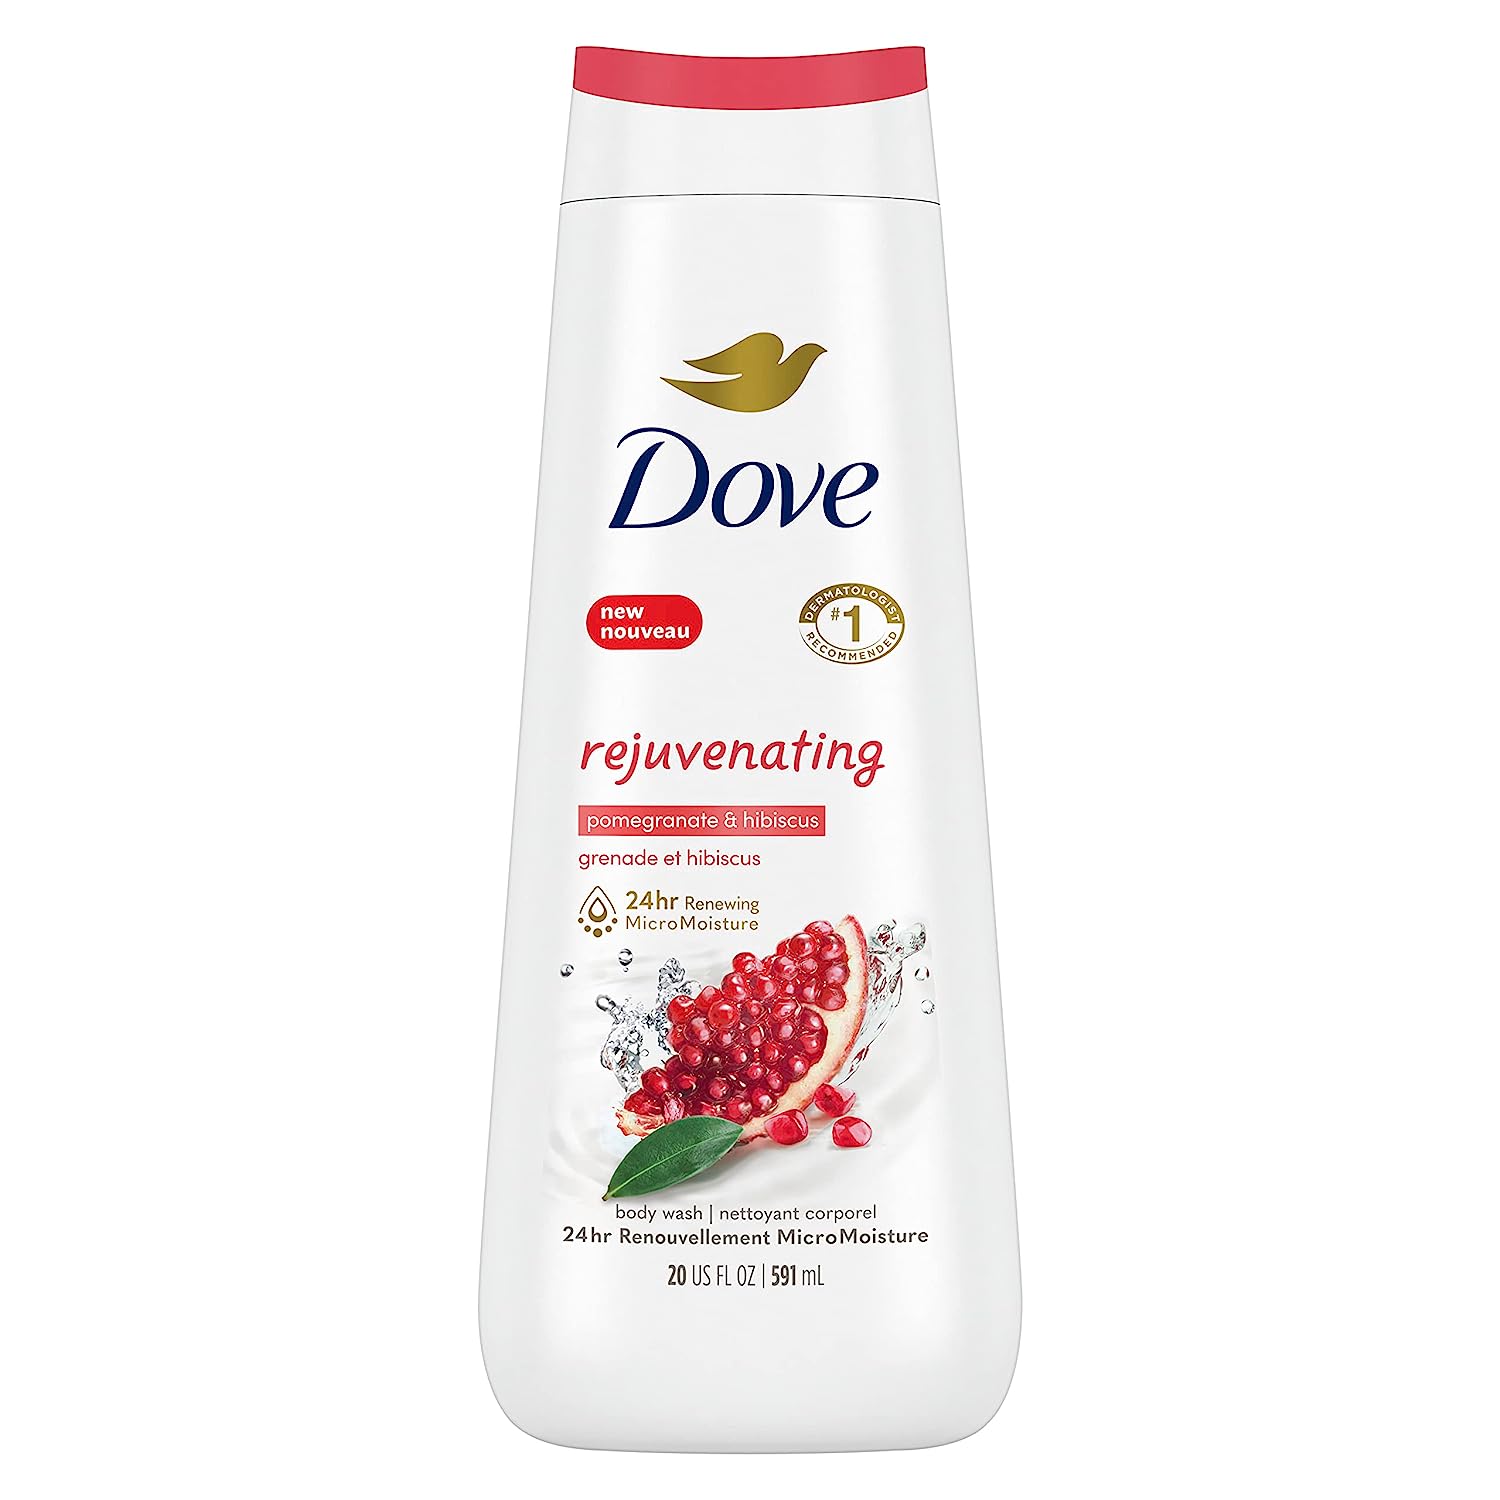 Dove Rejuvenating Pomegranate & Hibiscus Body Wash: Renewed & Healthy Skin with 24hr MicroMo